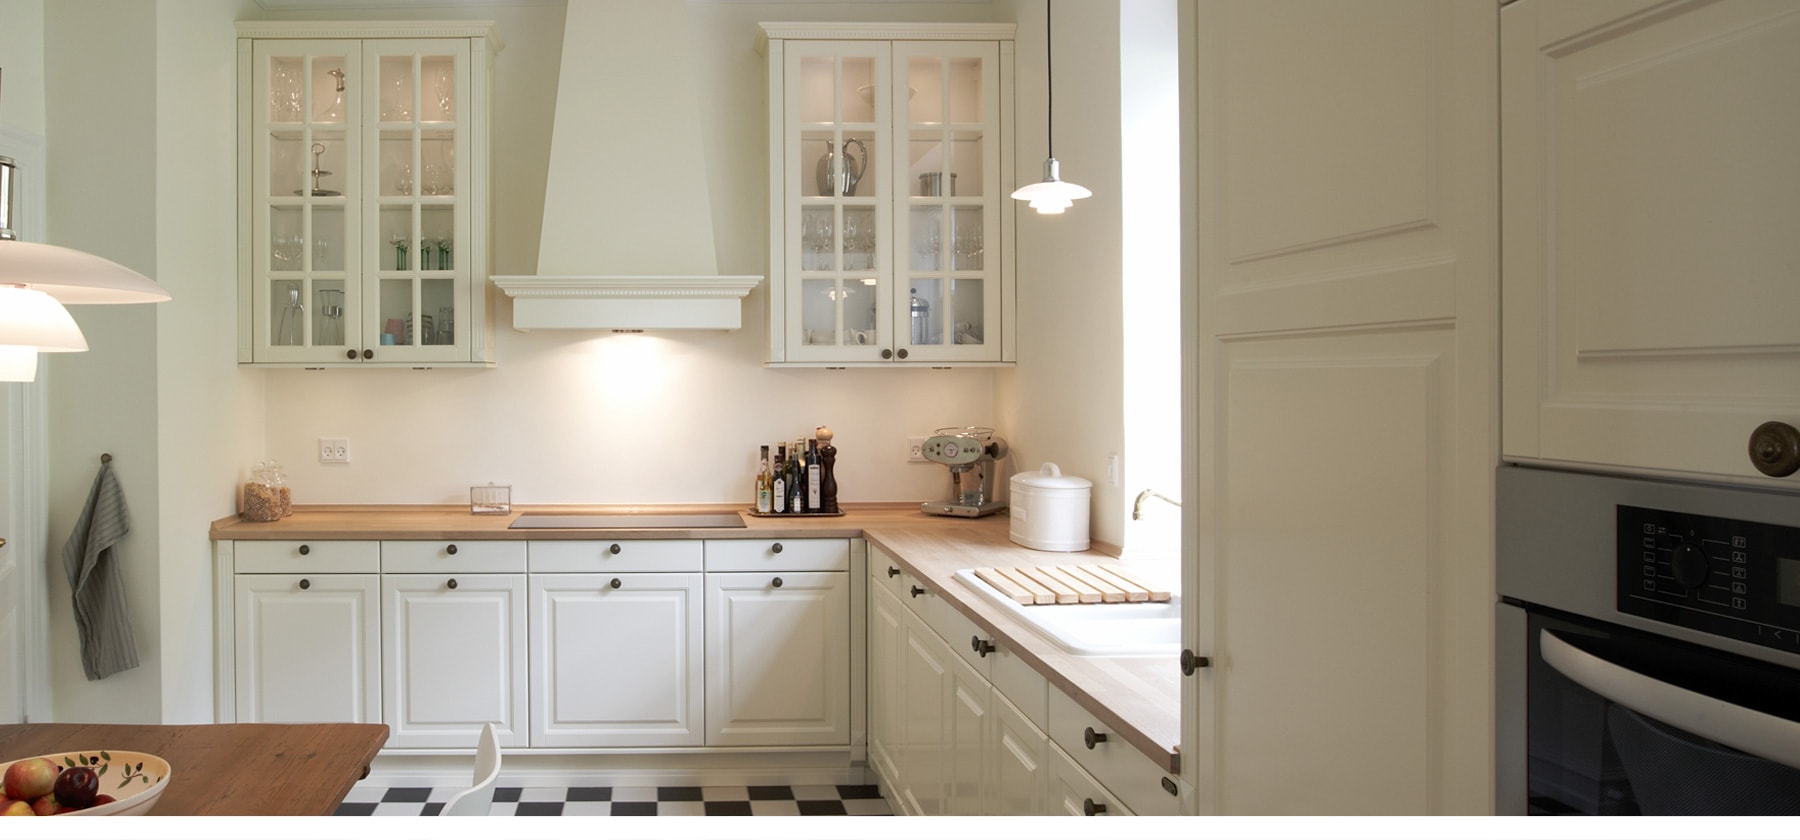 Joiner kitchenTHE ROMANTIC COUNTRY STYLE WITH HANDCRAFTED DETAILS